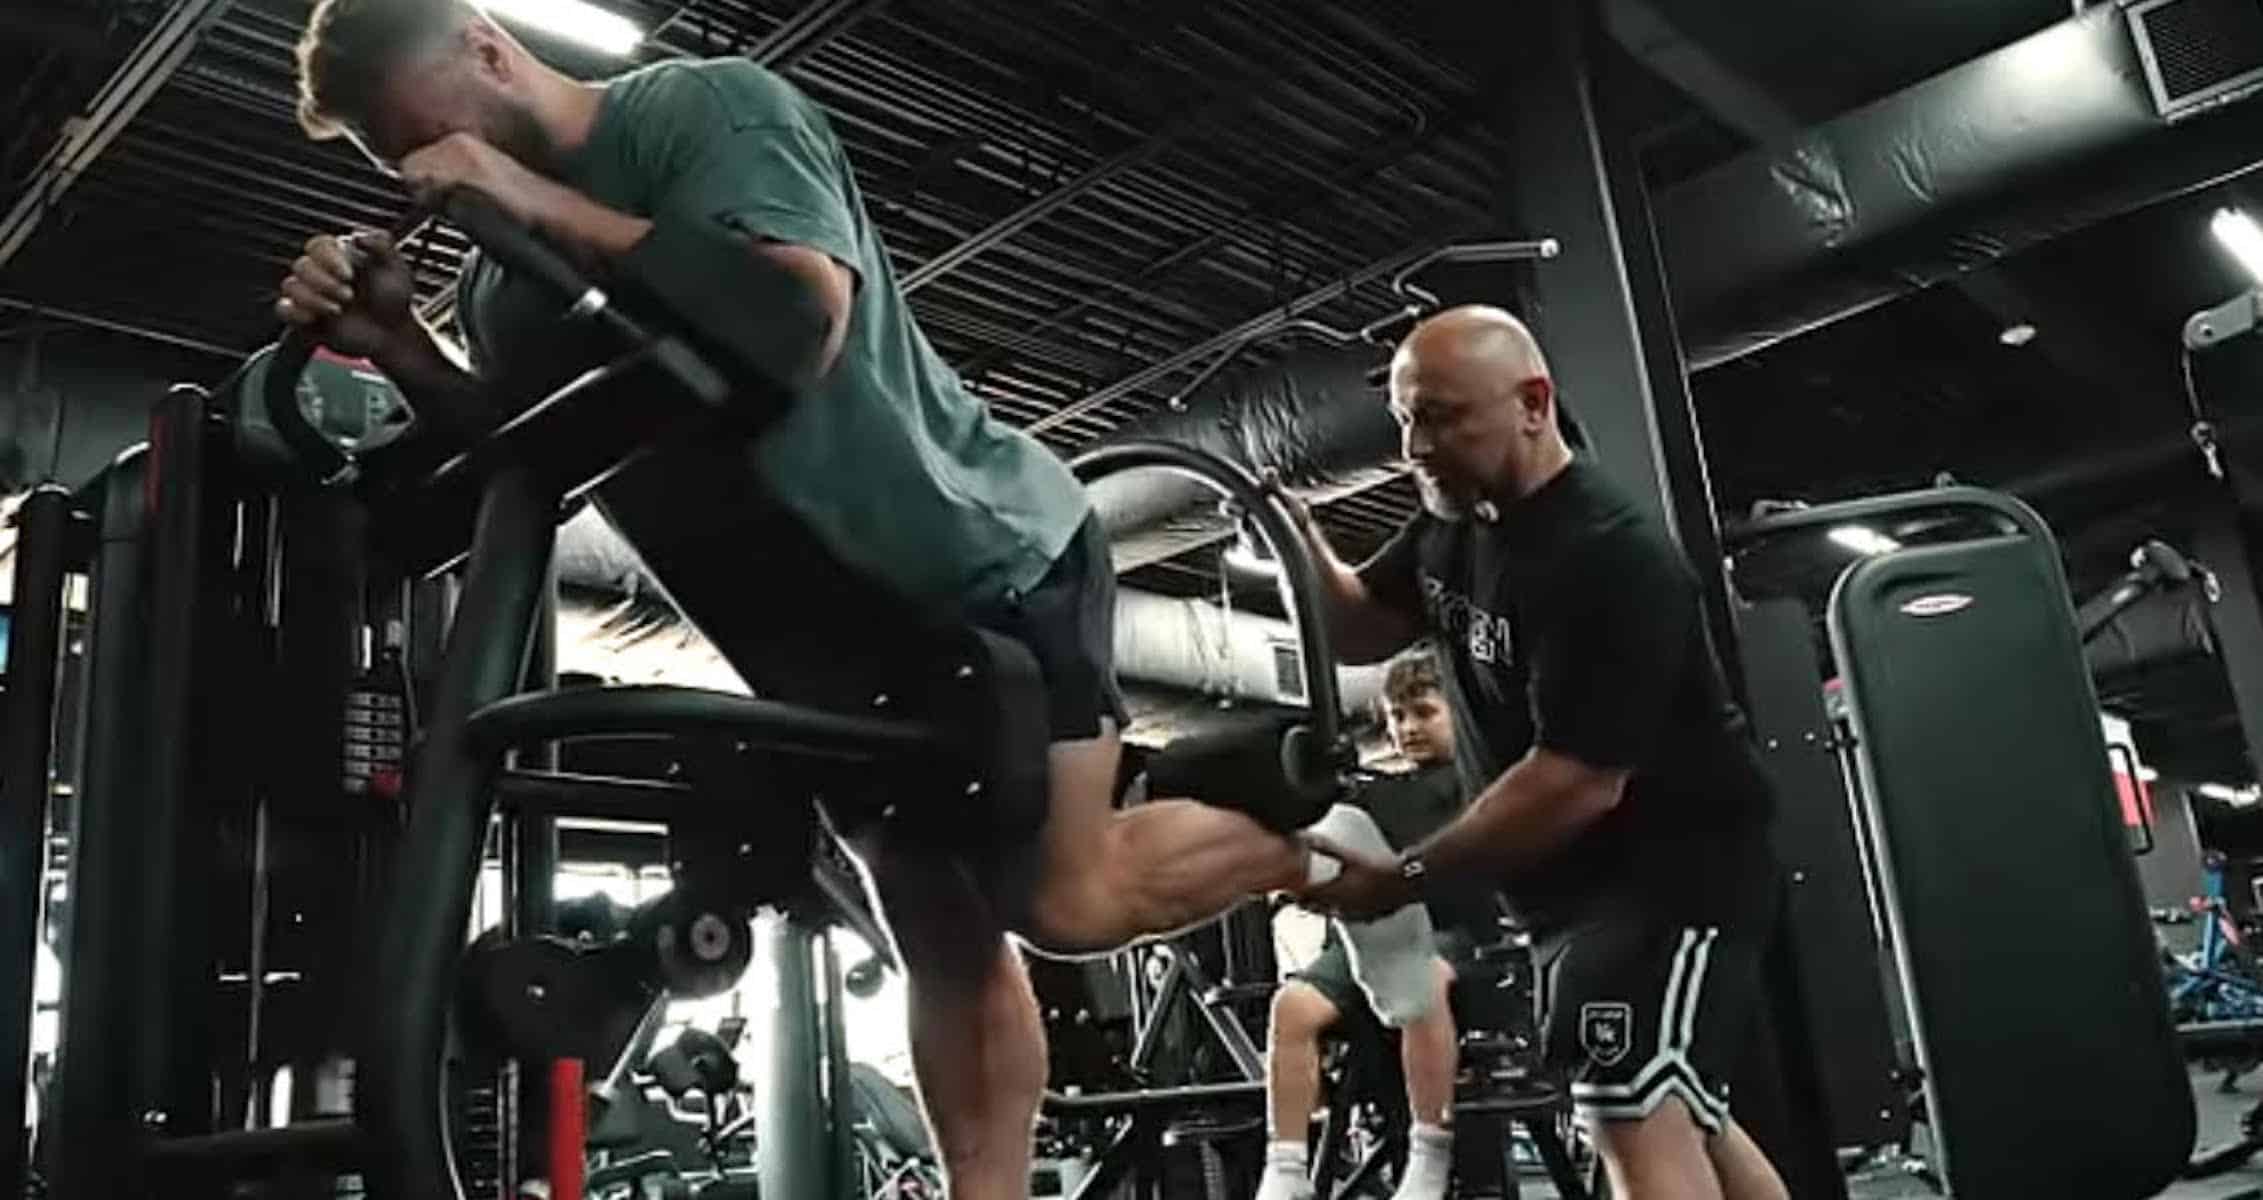 Hany Rambod guides Chris Bumstead through leg training ahead of the 2024 Olympic tournaments